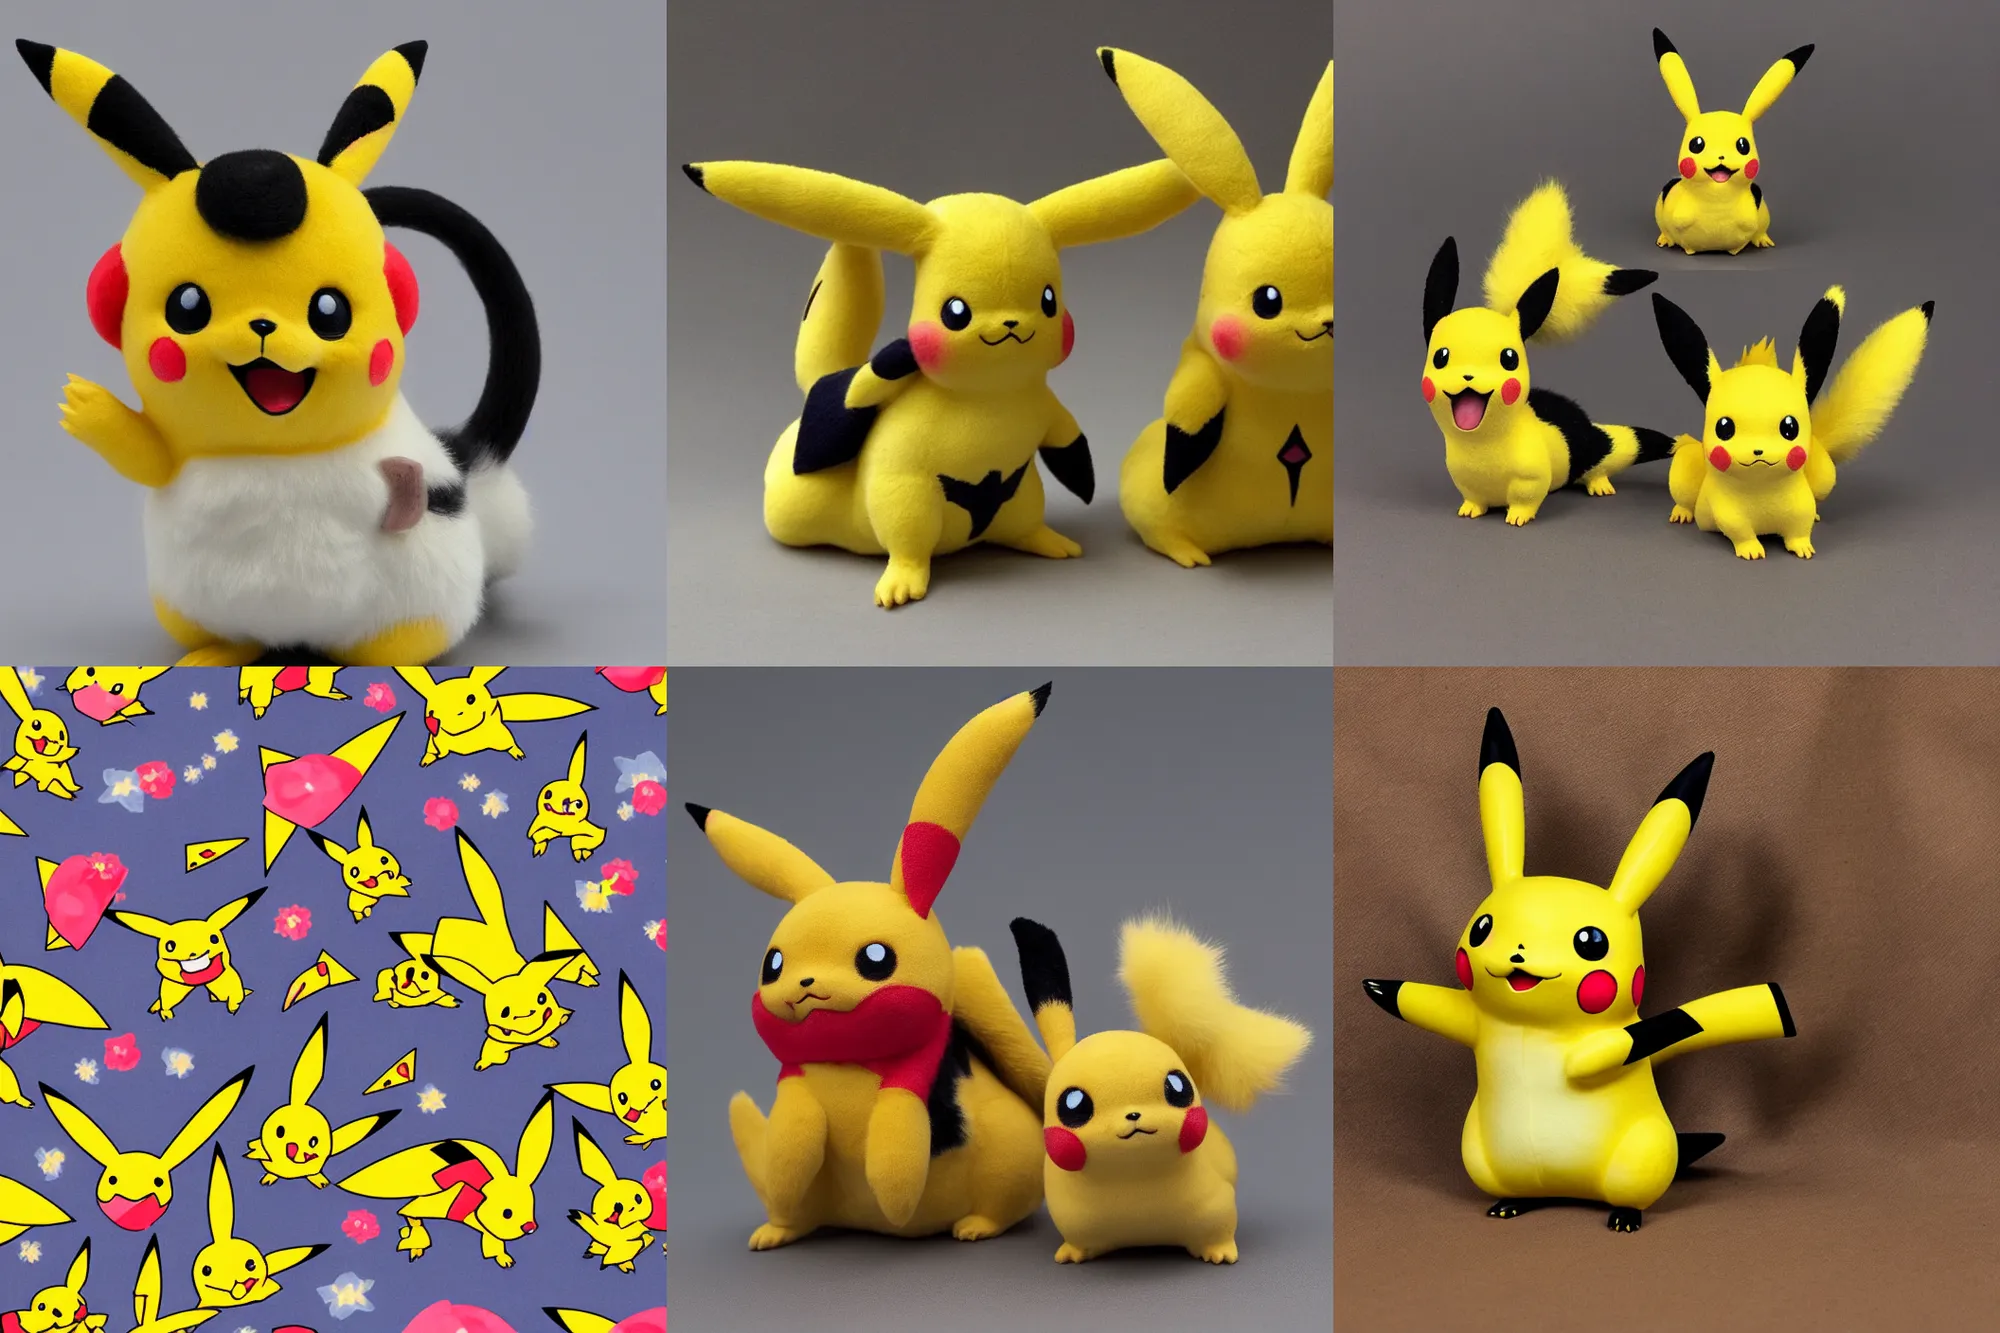 Prompt: Pikachu calico critter, detailed product photo